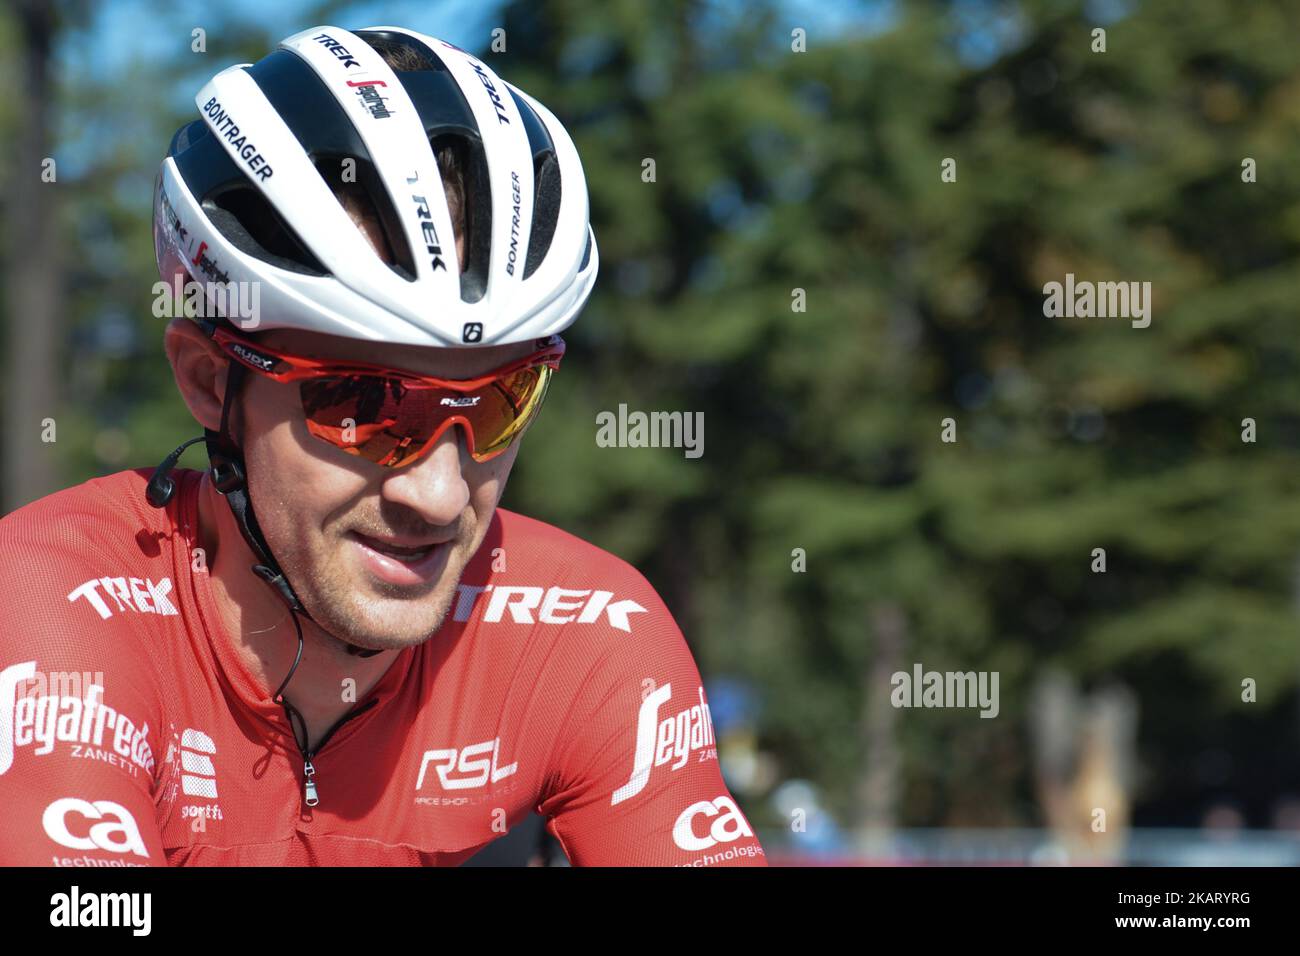 Edward Theuns of Trek Segafredo after winning the final sixth stage - the  143.7km Salcano Istanbul to Istanbul stage of the 53rd Presidential Cycling  Tour of Turkey 2017. On Sunday, 15 October